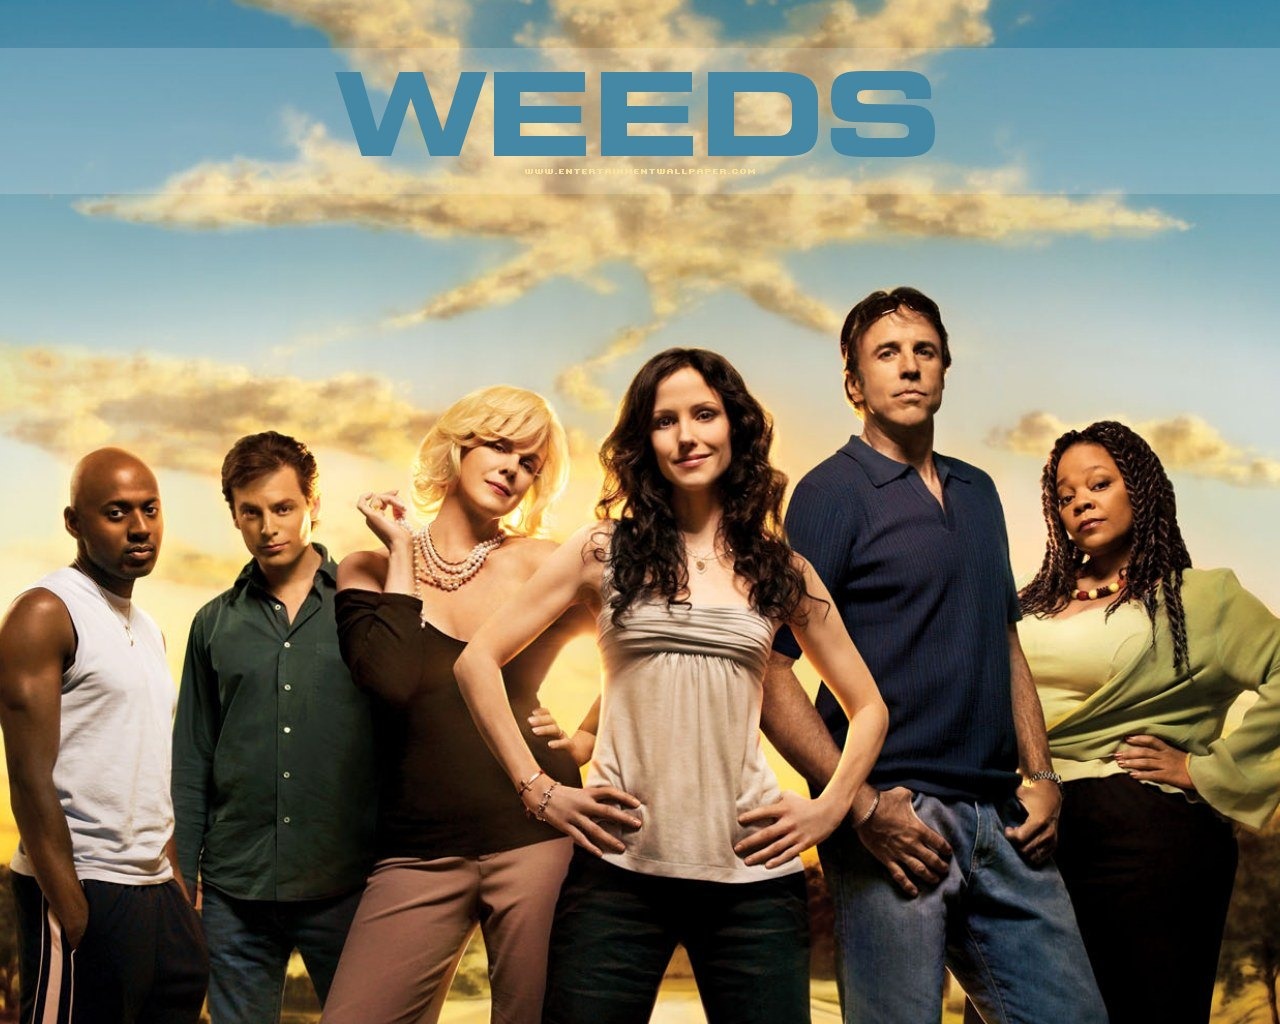 Weeds Tapete #13 - 1280x1024